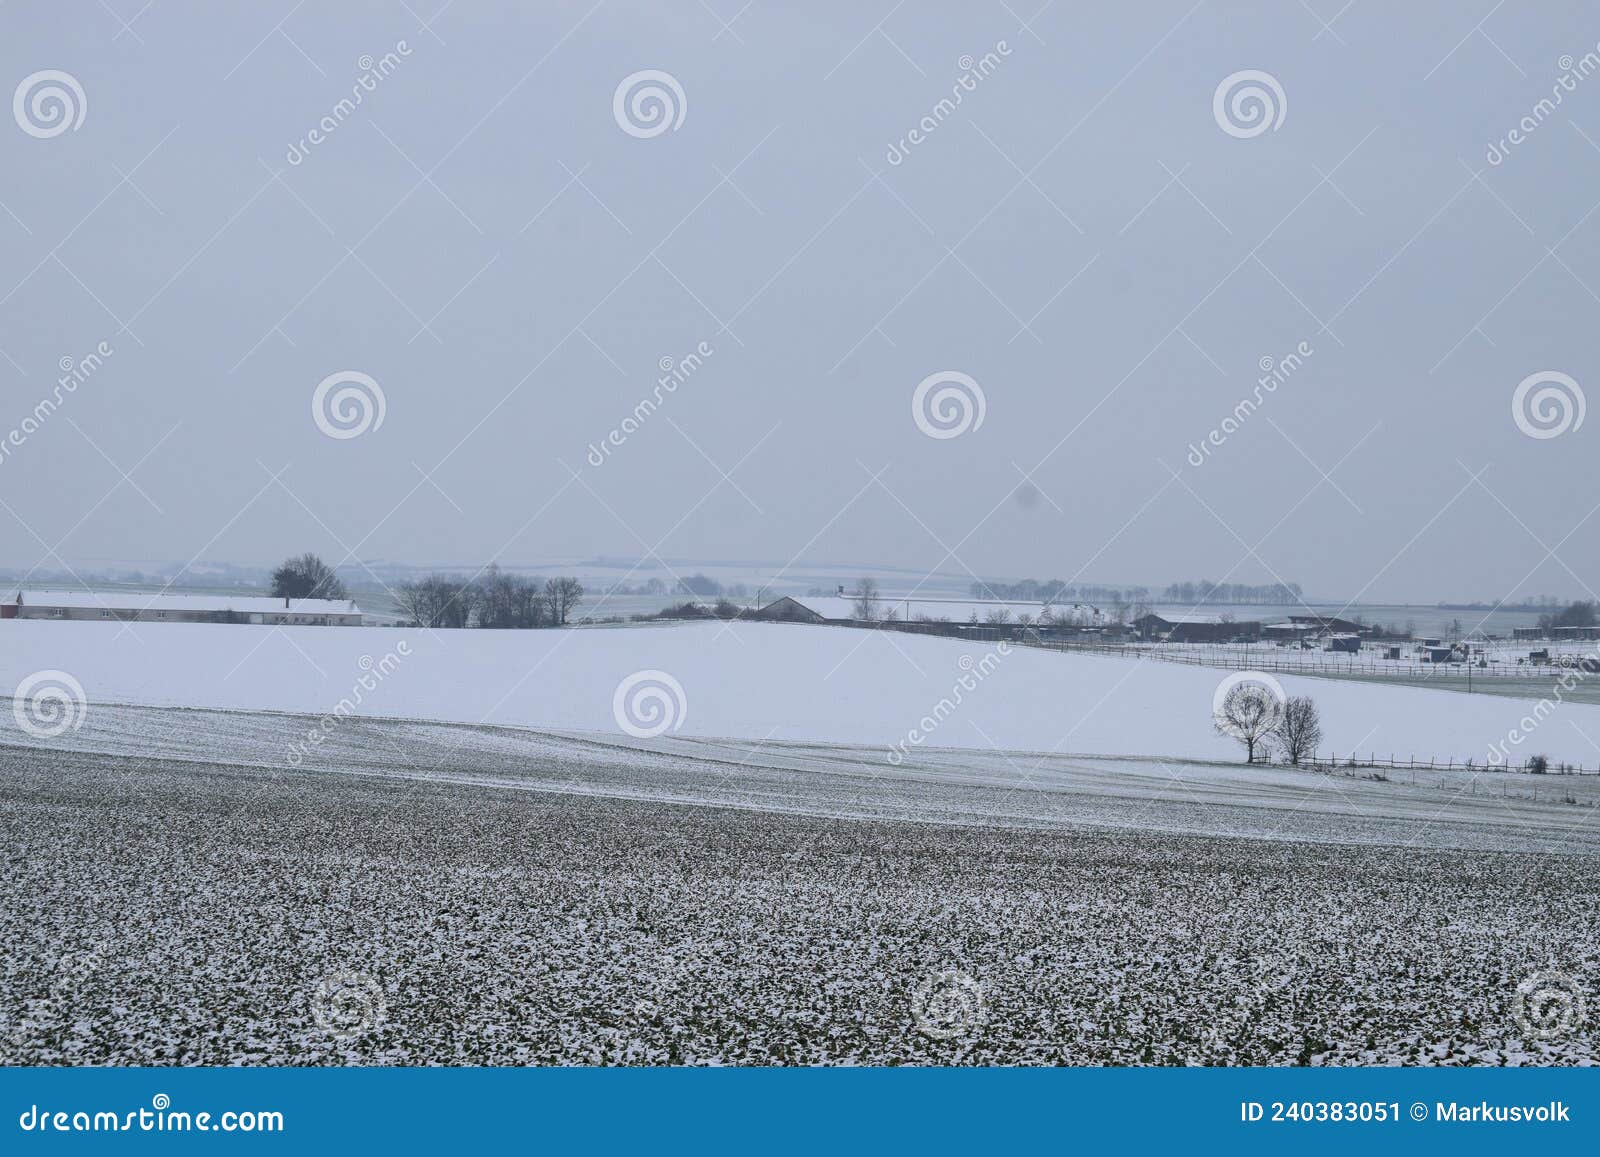 snowy landscape in the eifel between welling and thÃÂ¼r